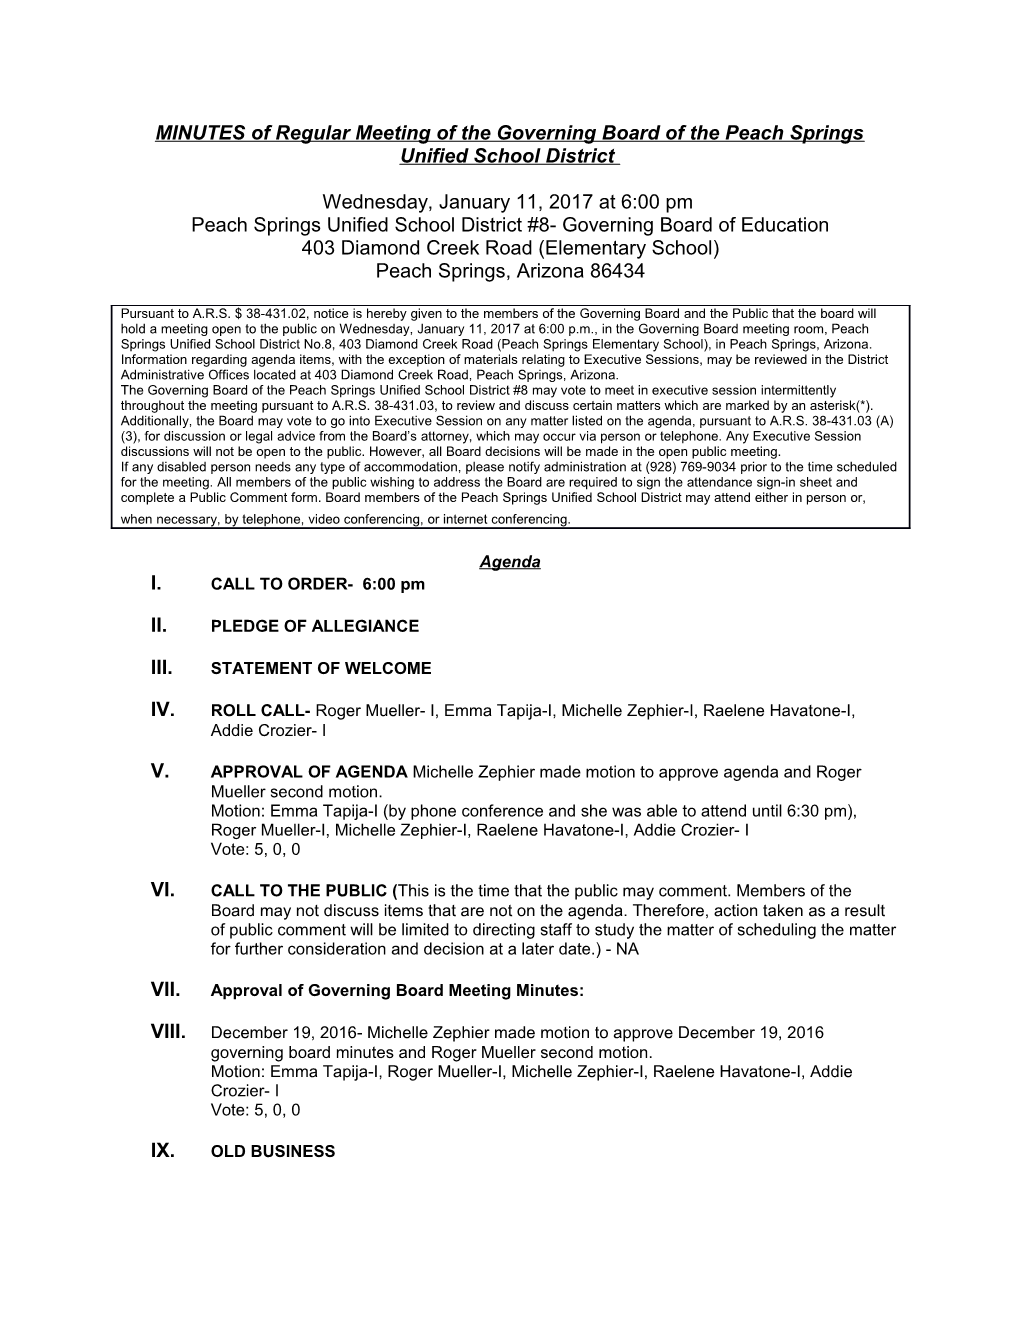 MINUTES of Regular Meeting of the Governing Board of the Peach Springs Unified School District